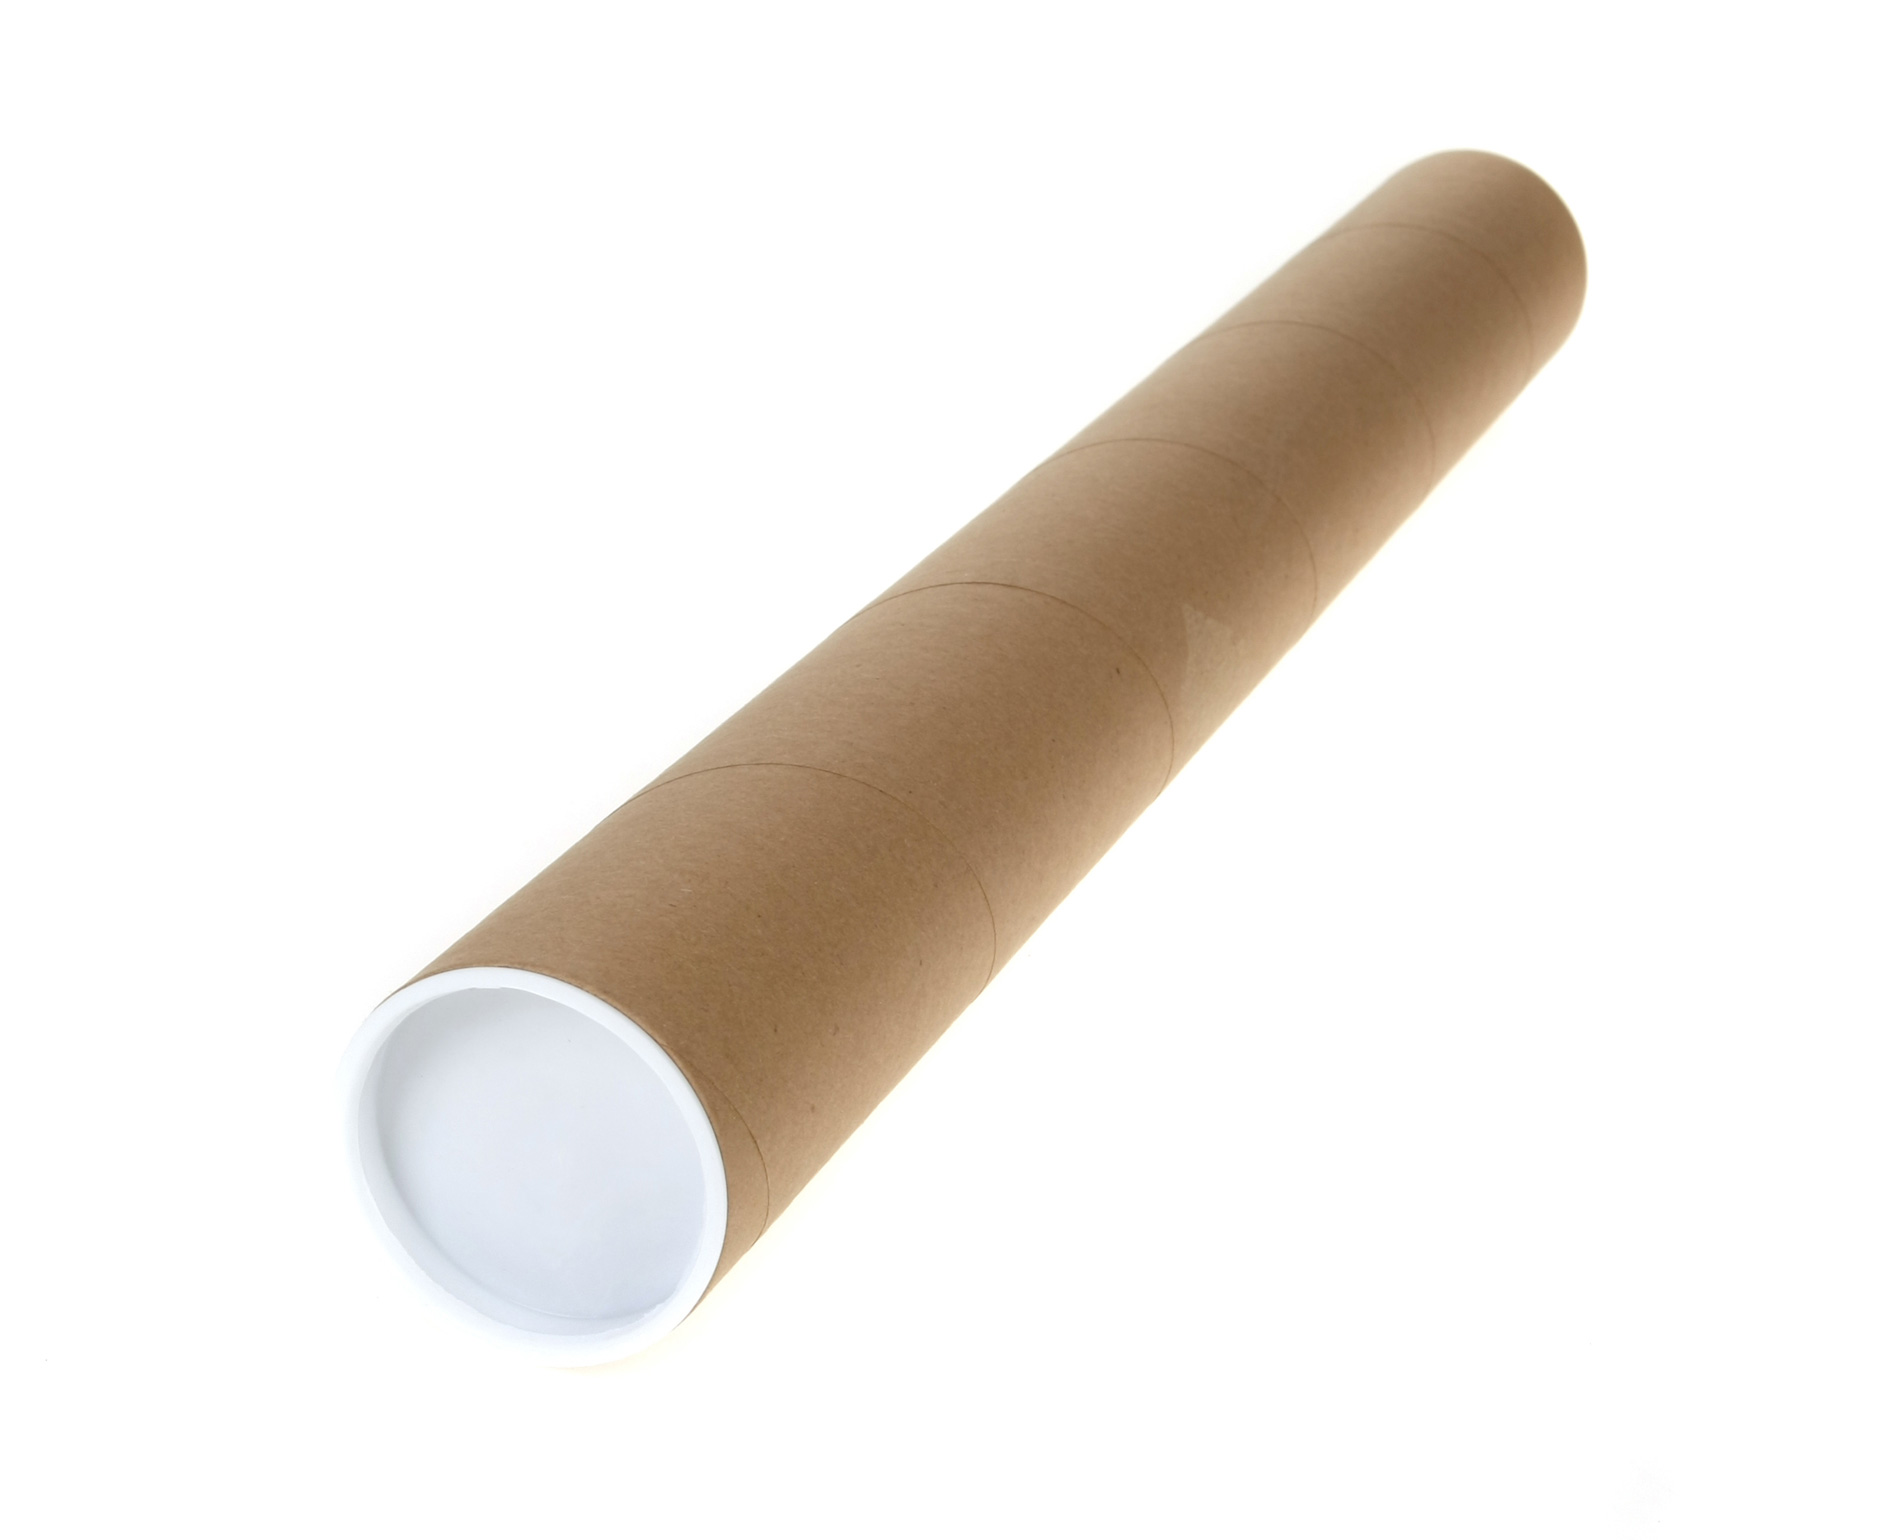 2 Pack Mailing Tubes with Caps 2-inch x 26 inch usable Length